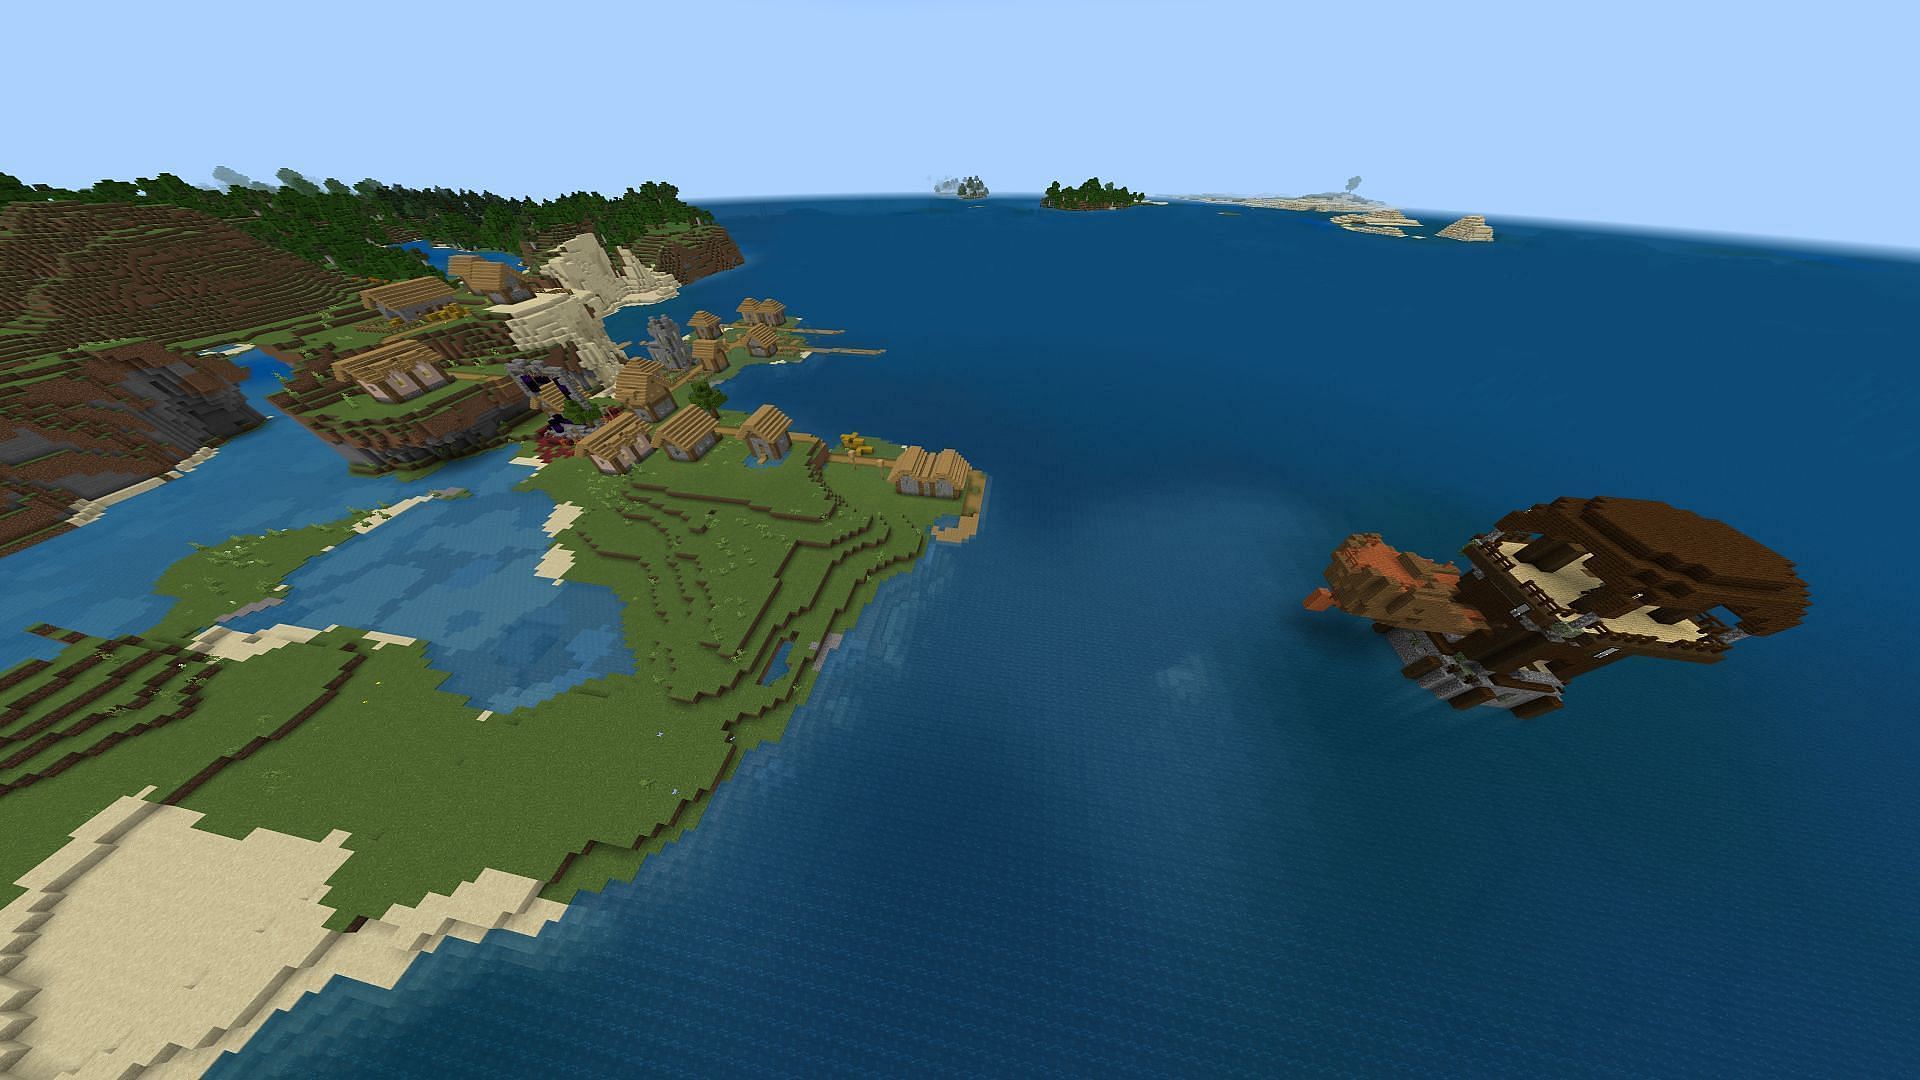 A plethora of structures await Minecraft players using this seed (Image via Mojang)